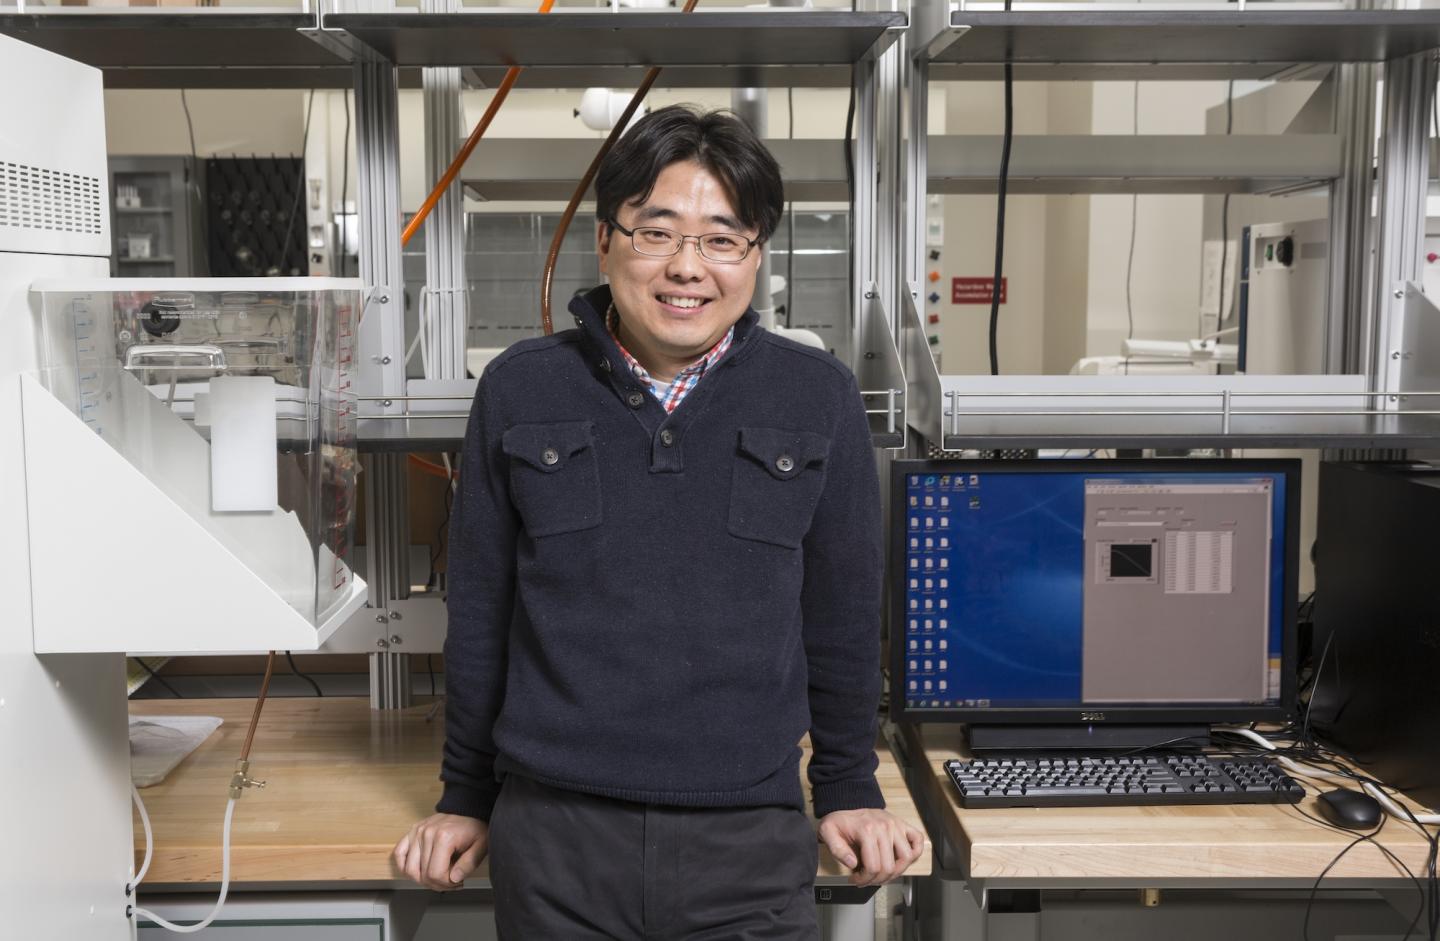 This is Binghamton University Electrical and Computer Science assistant professor Seokheun Choi. (Binghamton University, State University of New York)